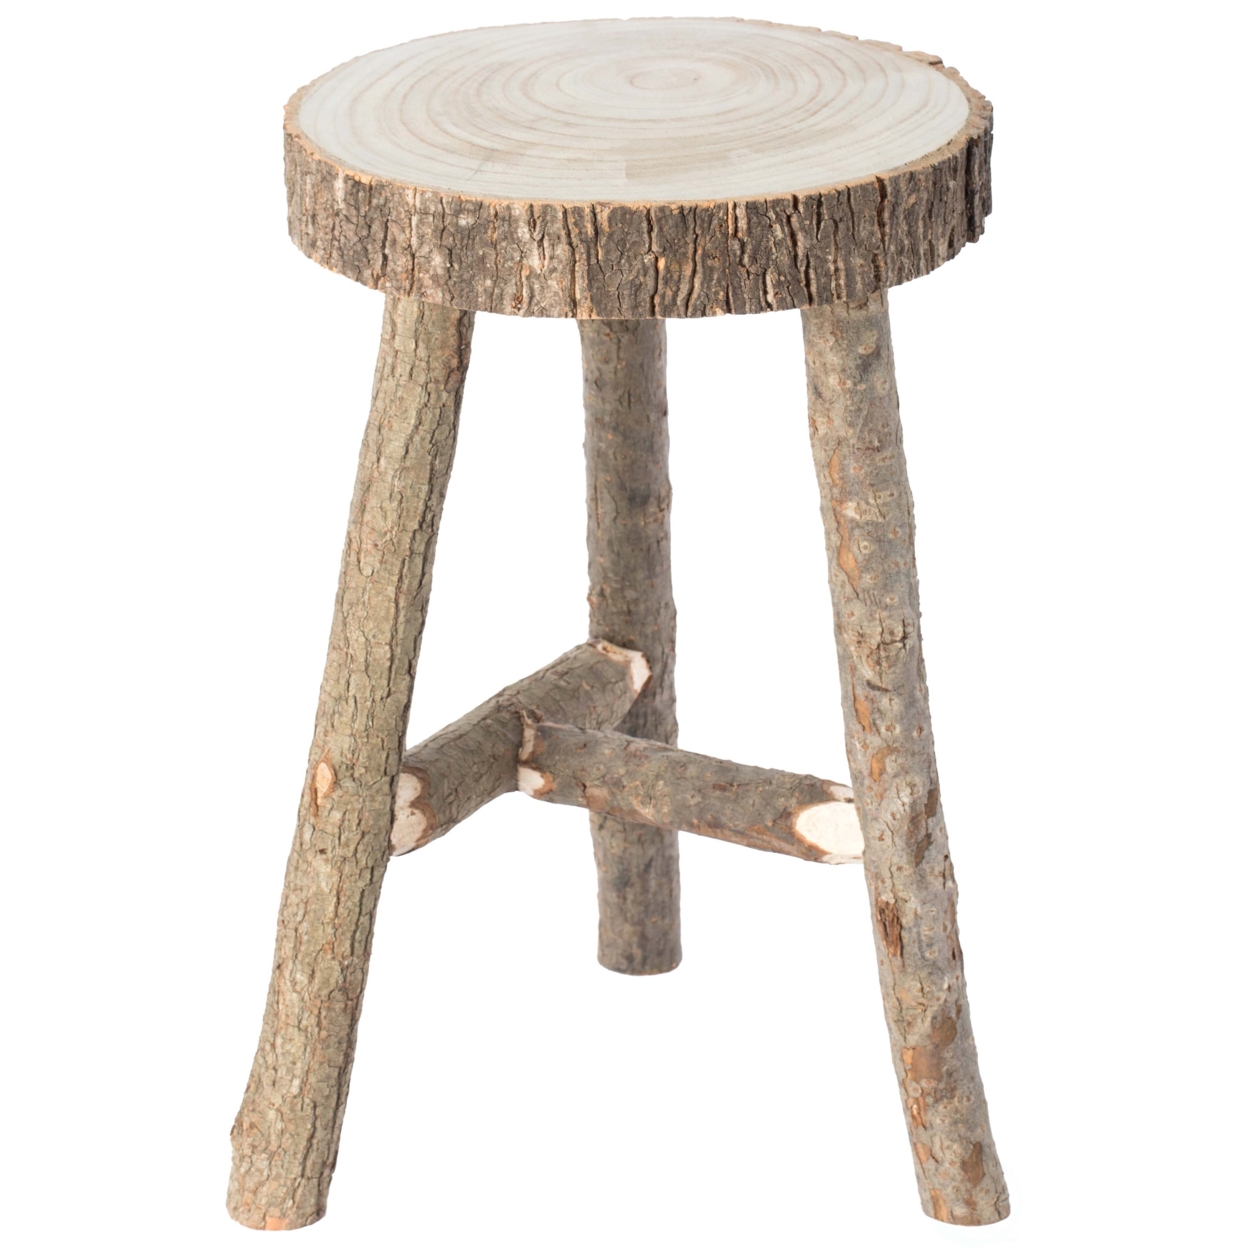 Decorative Antique Log Cabin Natural Wooden Accent Stool Side Table